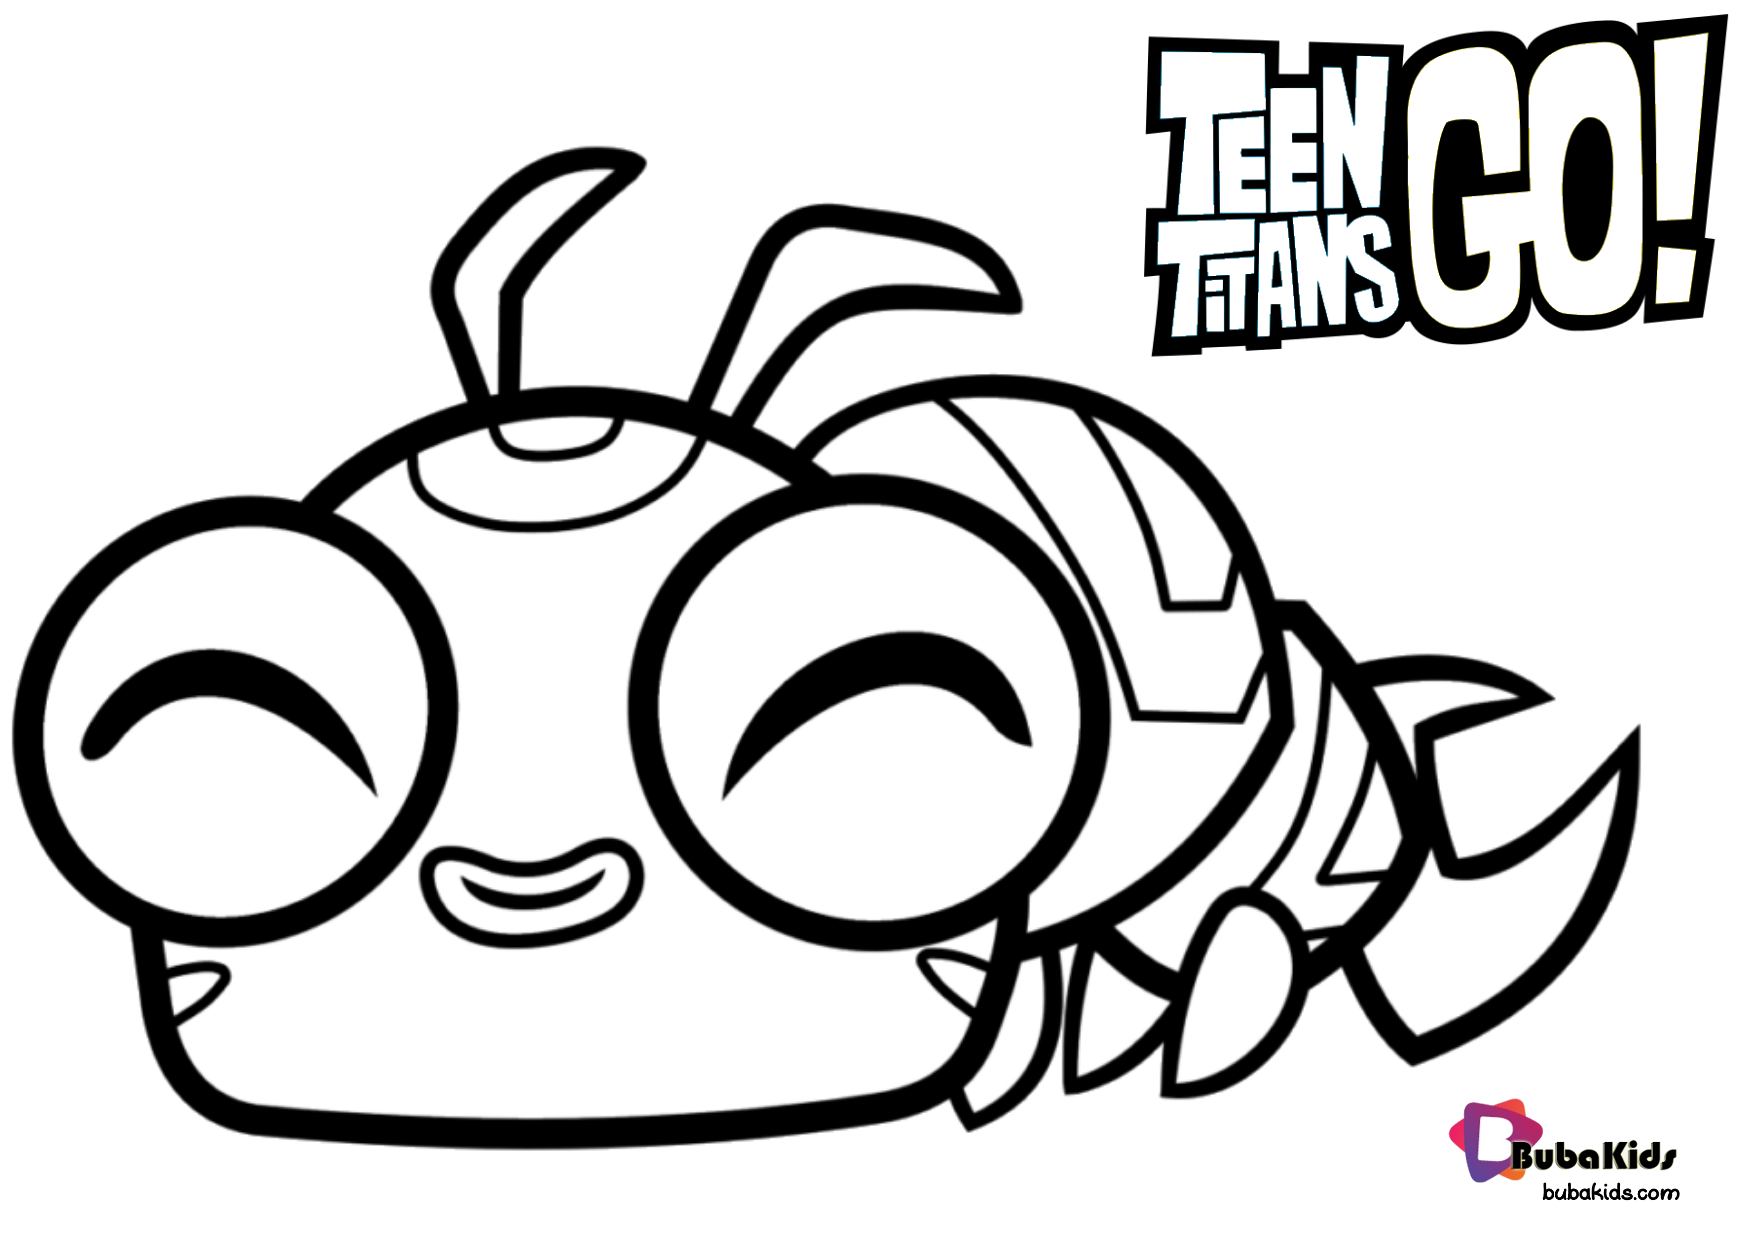 Free download and printable Teen Titans Go! coloring page. Wallpaper